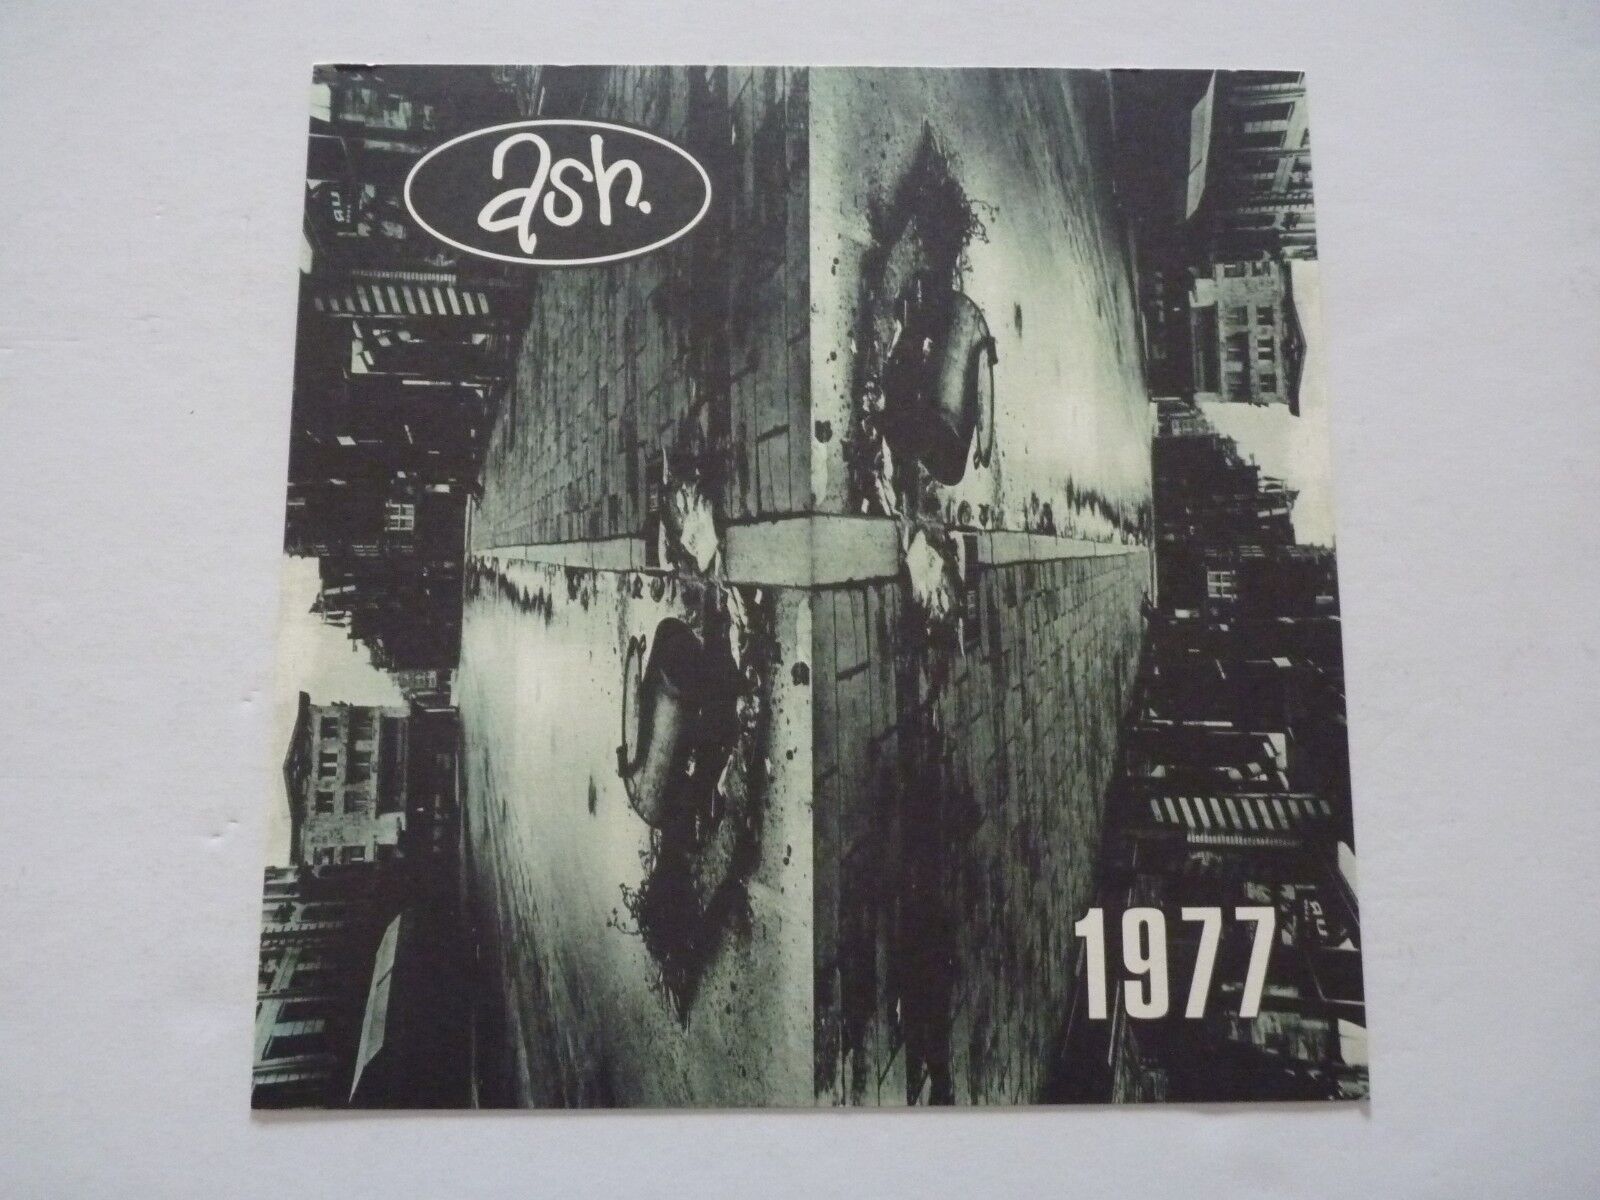 Ash. 1977 1996 Promo LP Record Photo Poster painting Flat 12x12 Poster